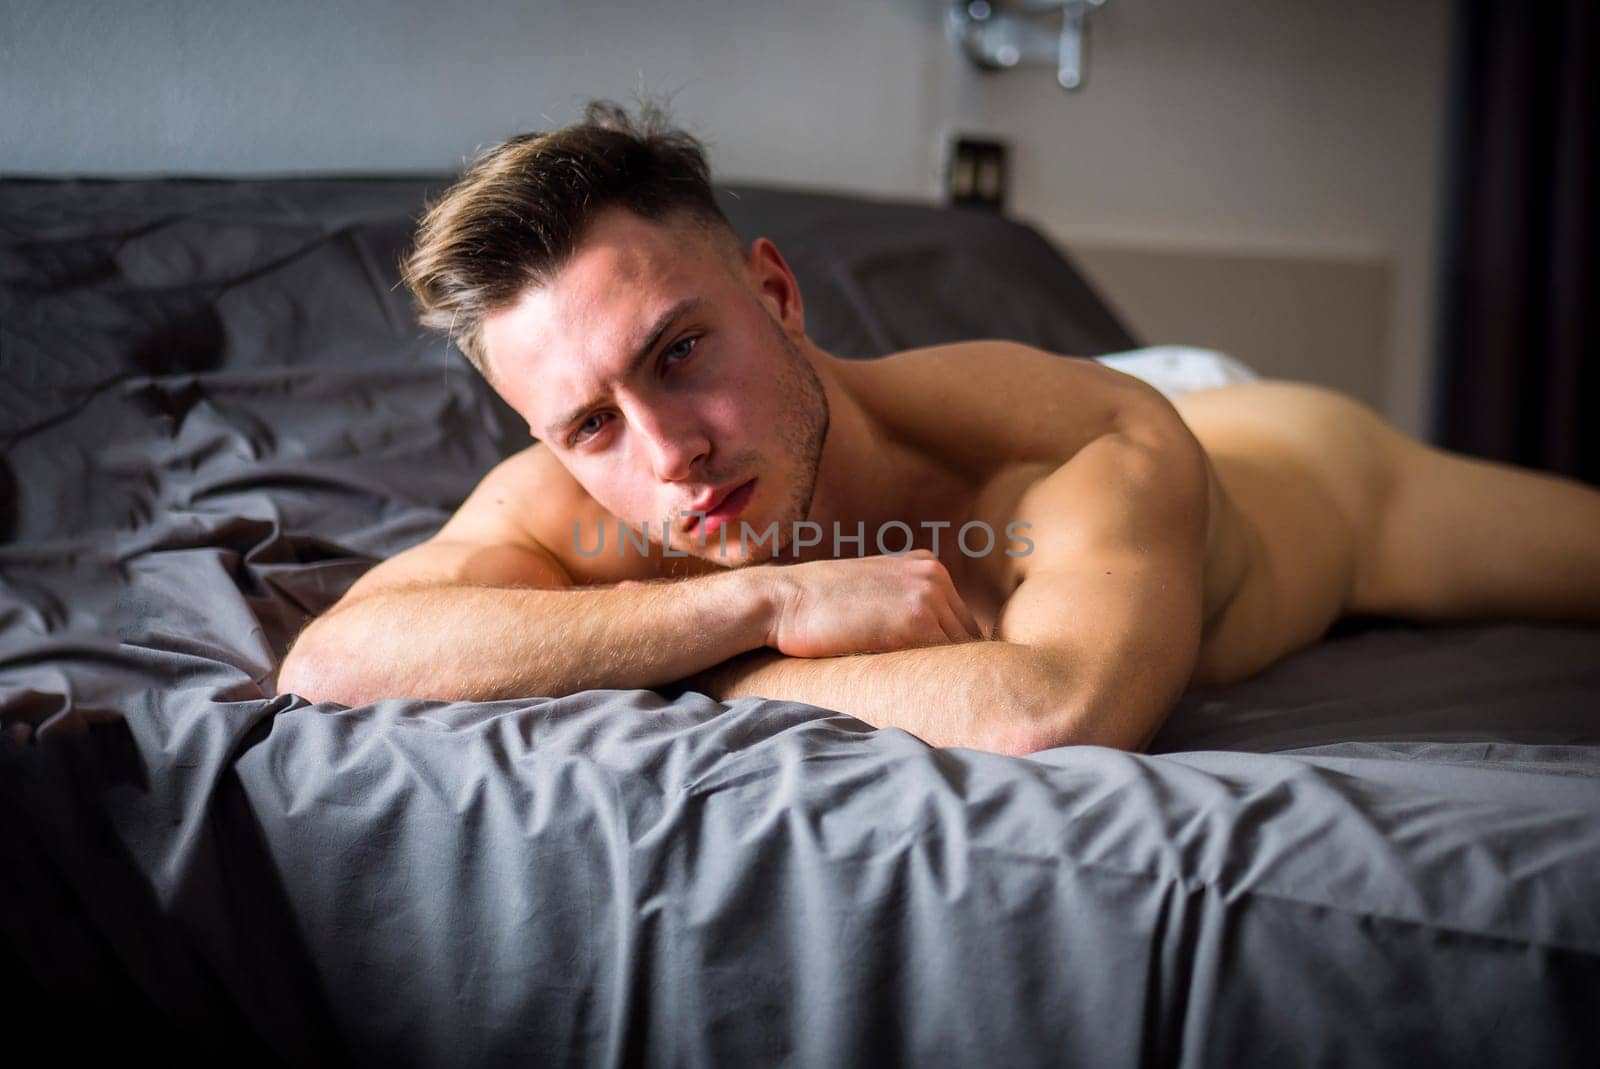 Totally naked sexy young man with muscular body on bed looking at camera